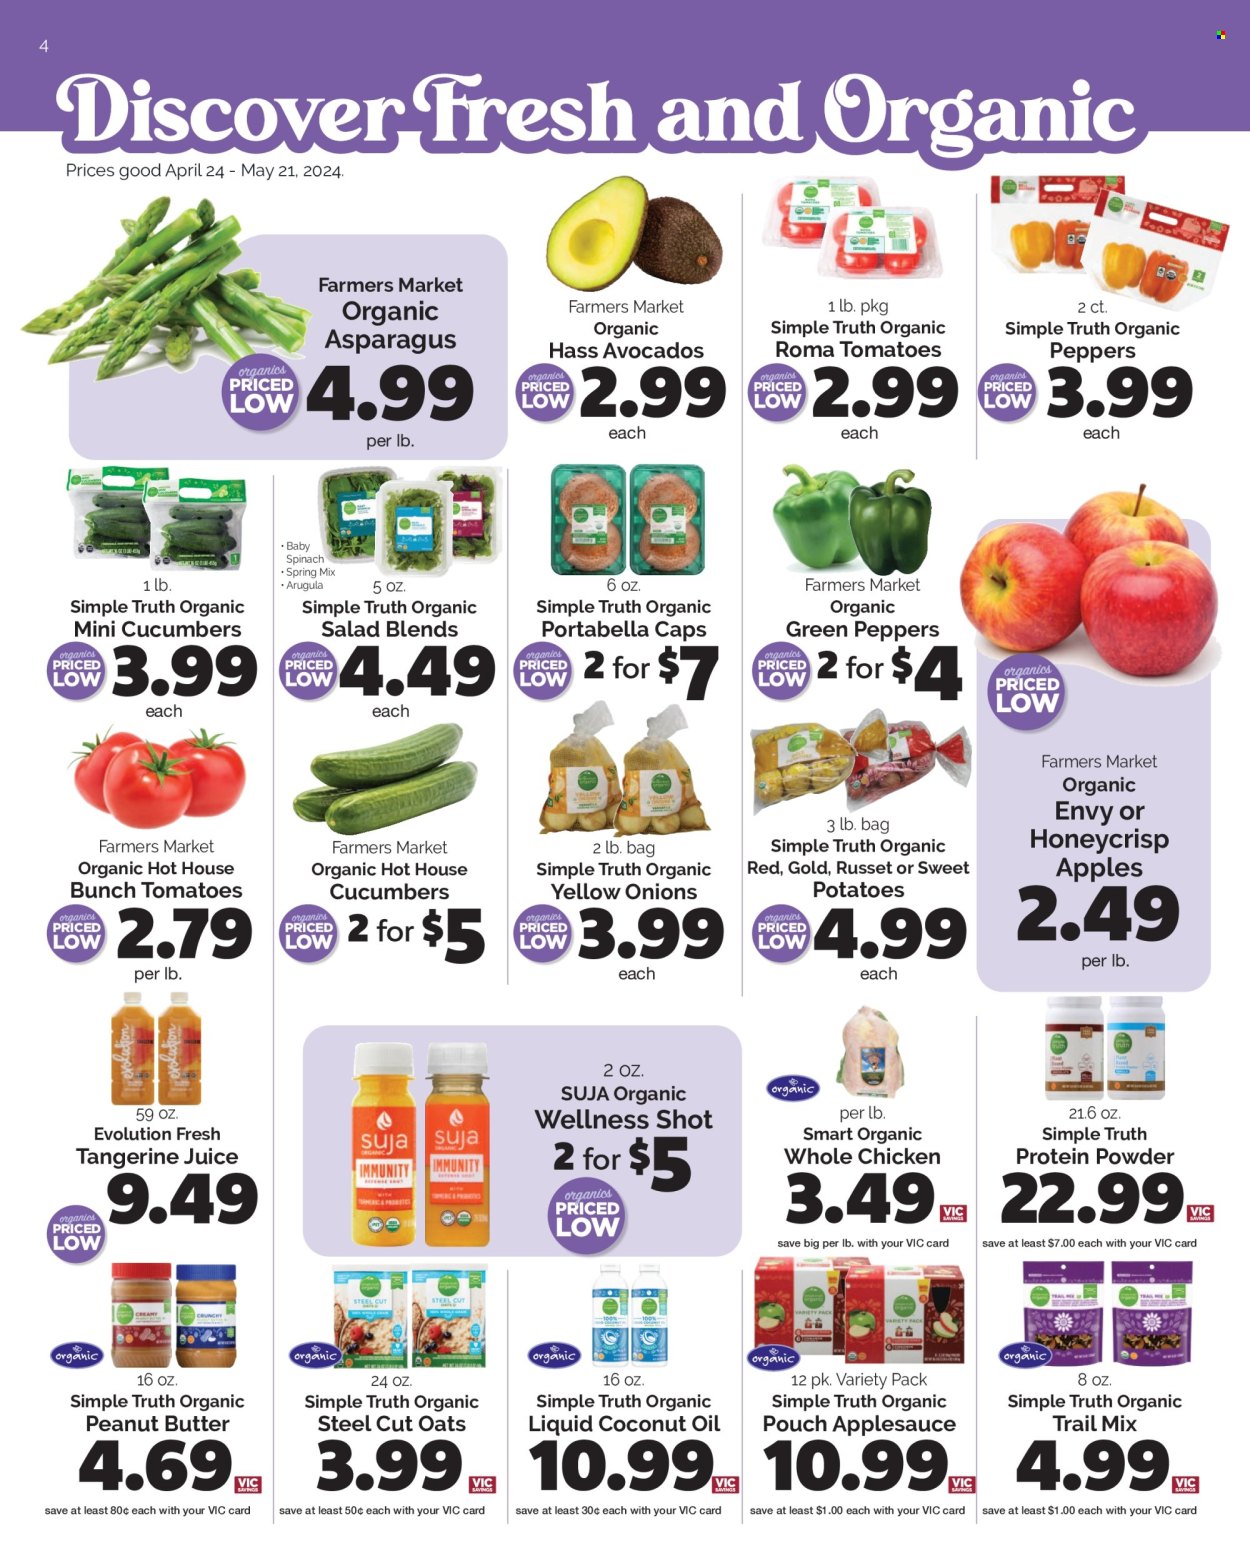 thumbnail - Harris Teeter Flyer - 04/24/2024 - 05/21/2024 - Sales products - portobello mushrooms, arugula, asparagus, cucumber, russet potatoes, salad greens, spinach, tomatoes, potatoes, onion, salad, peppers, green pepper, avocado, mandarines, oats, coconut oil, apple sauce, peanut butter, trail mix, juice, whole chicken, chicken, sauce. Page 4.